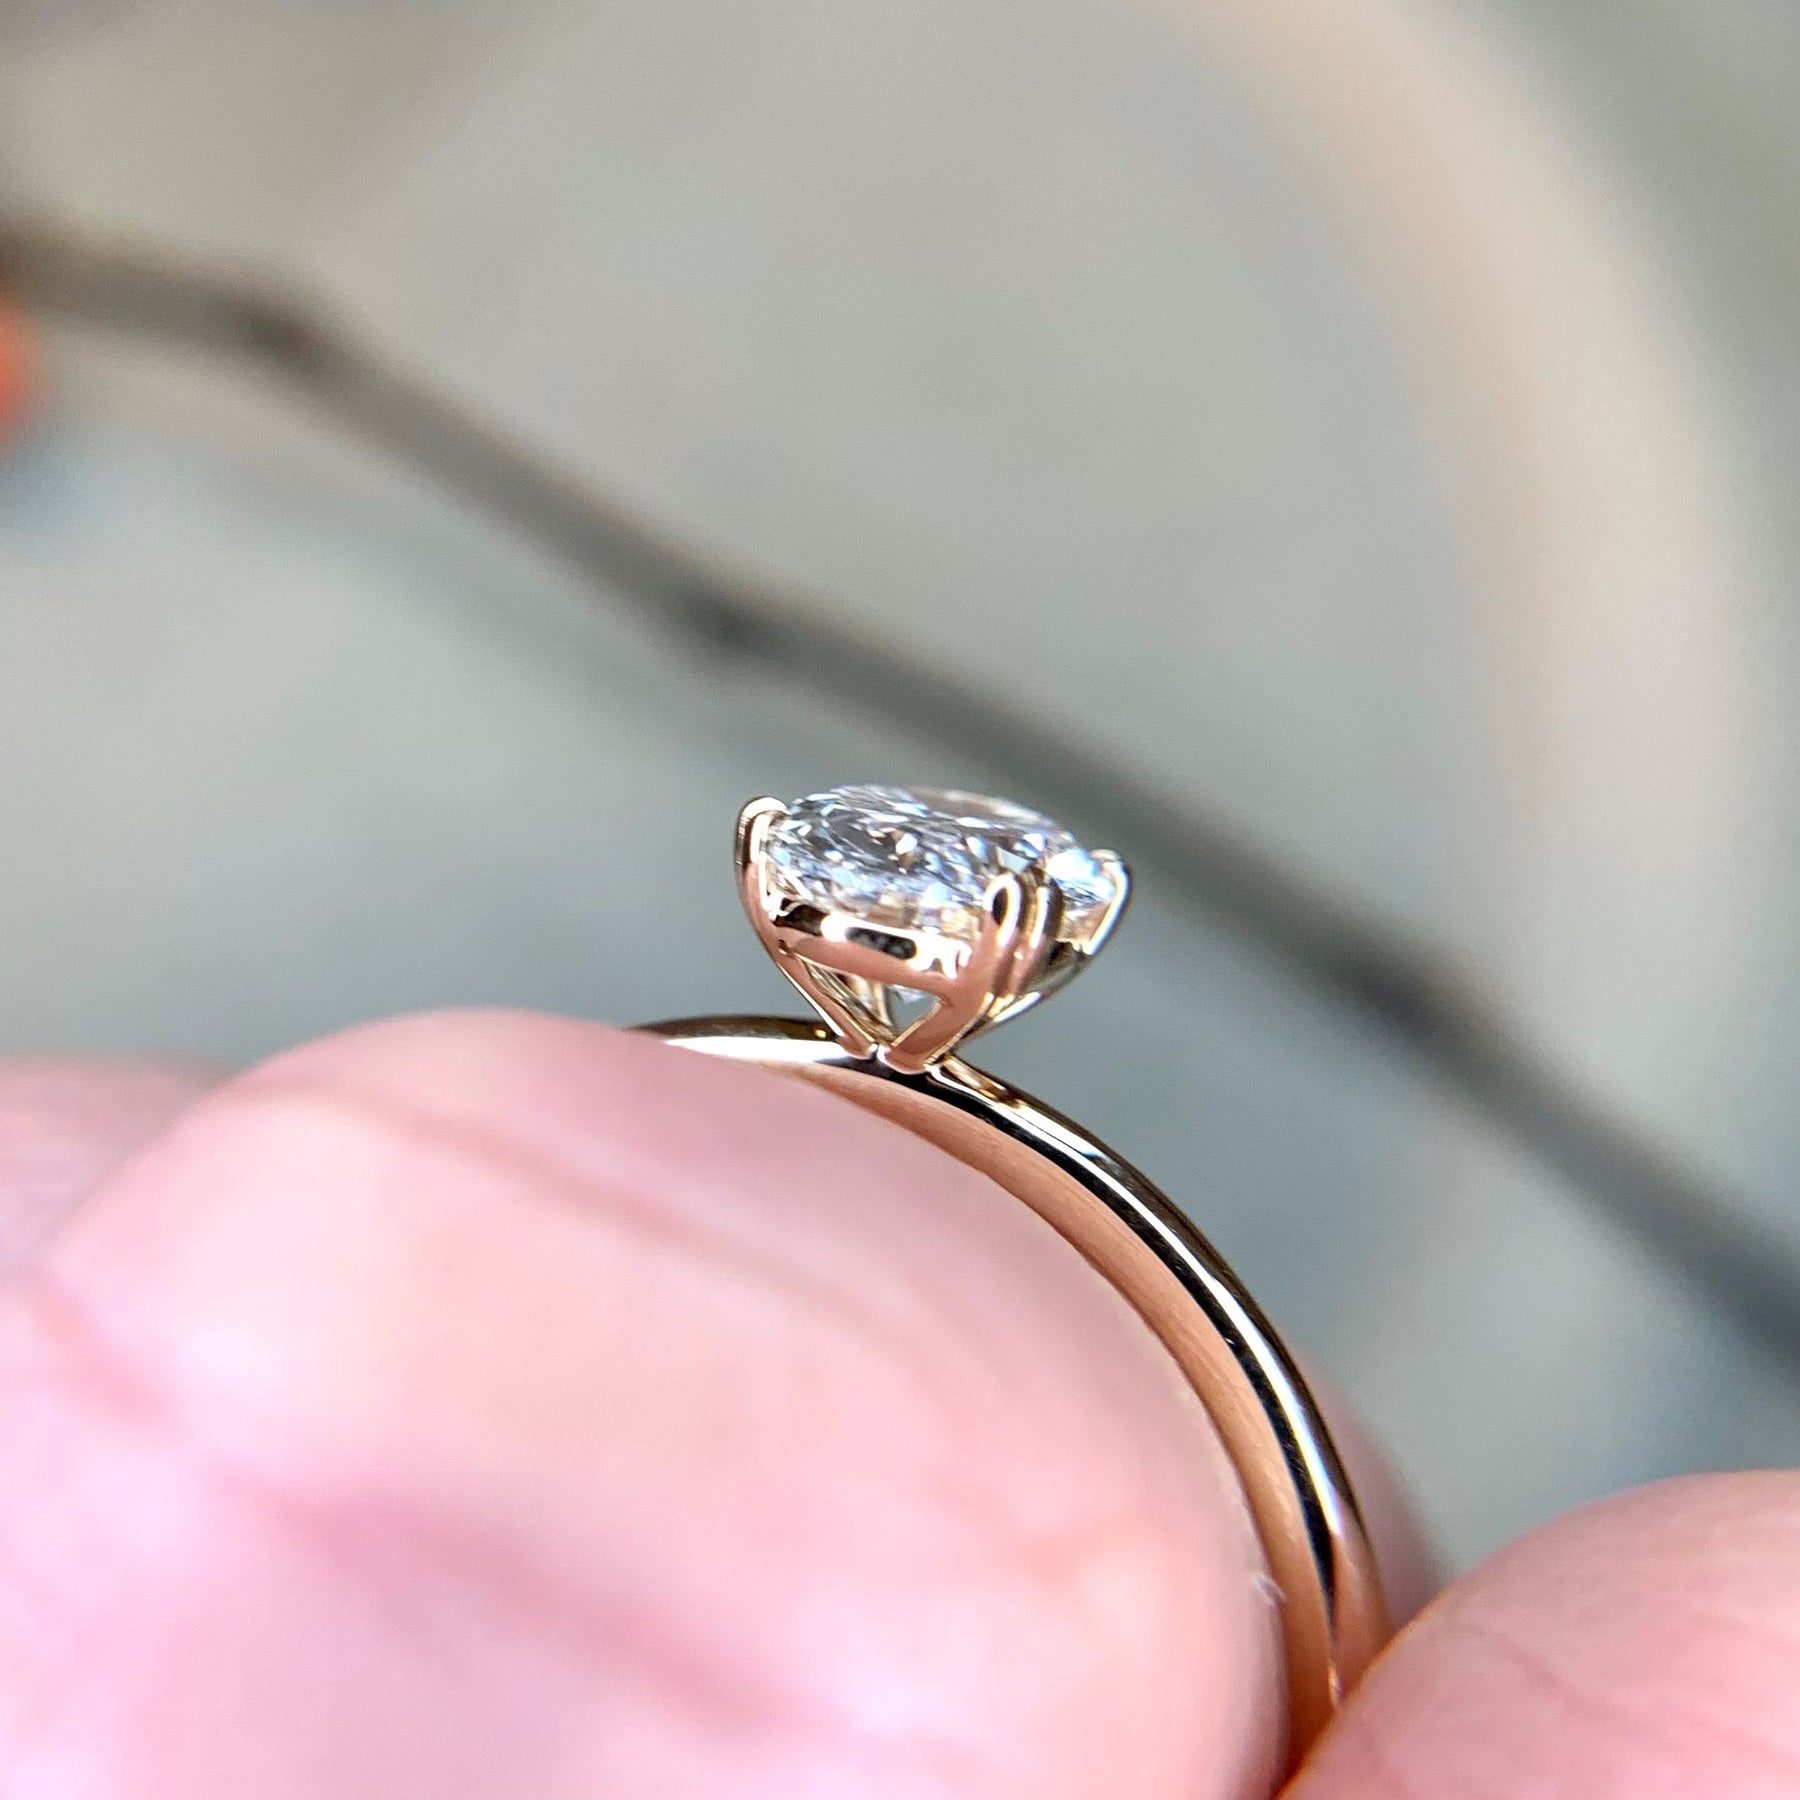 Lab Grown Traditional Solitaire Engagement Ring | MiaDonna